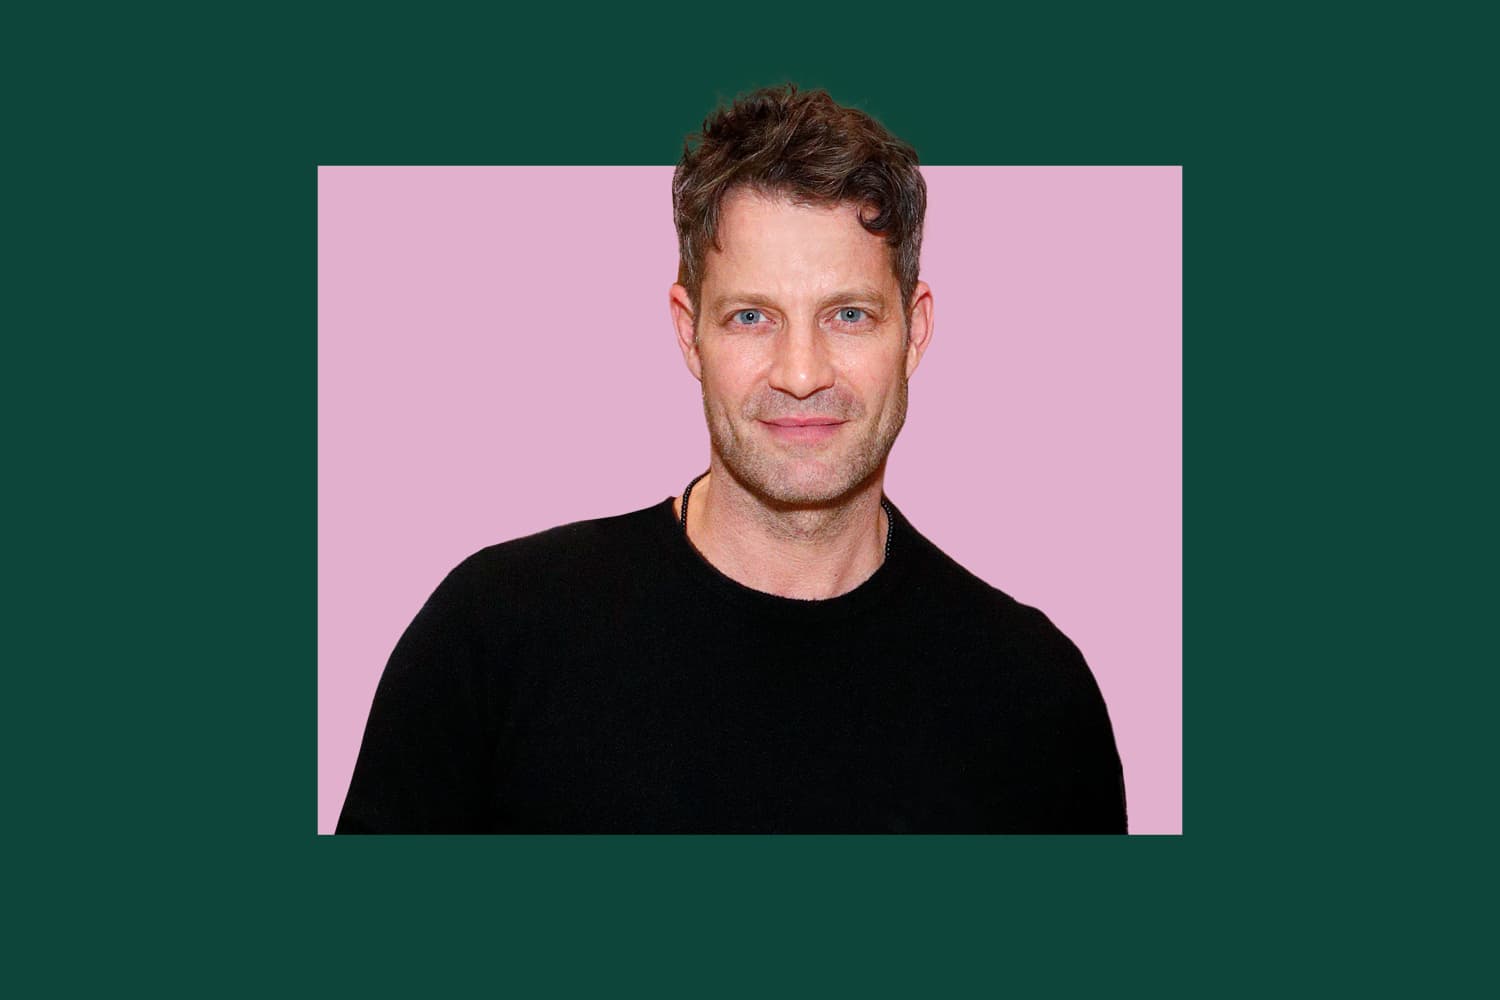 Nate Berkus Loves This Vintage Sofa So Much, He Bought It Twice